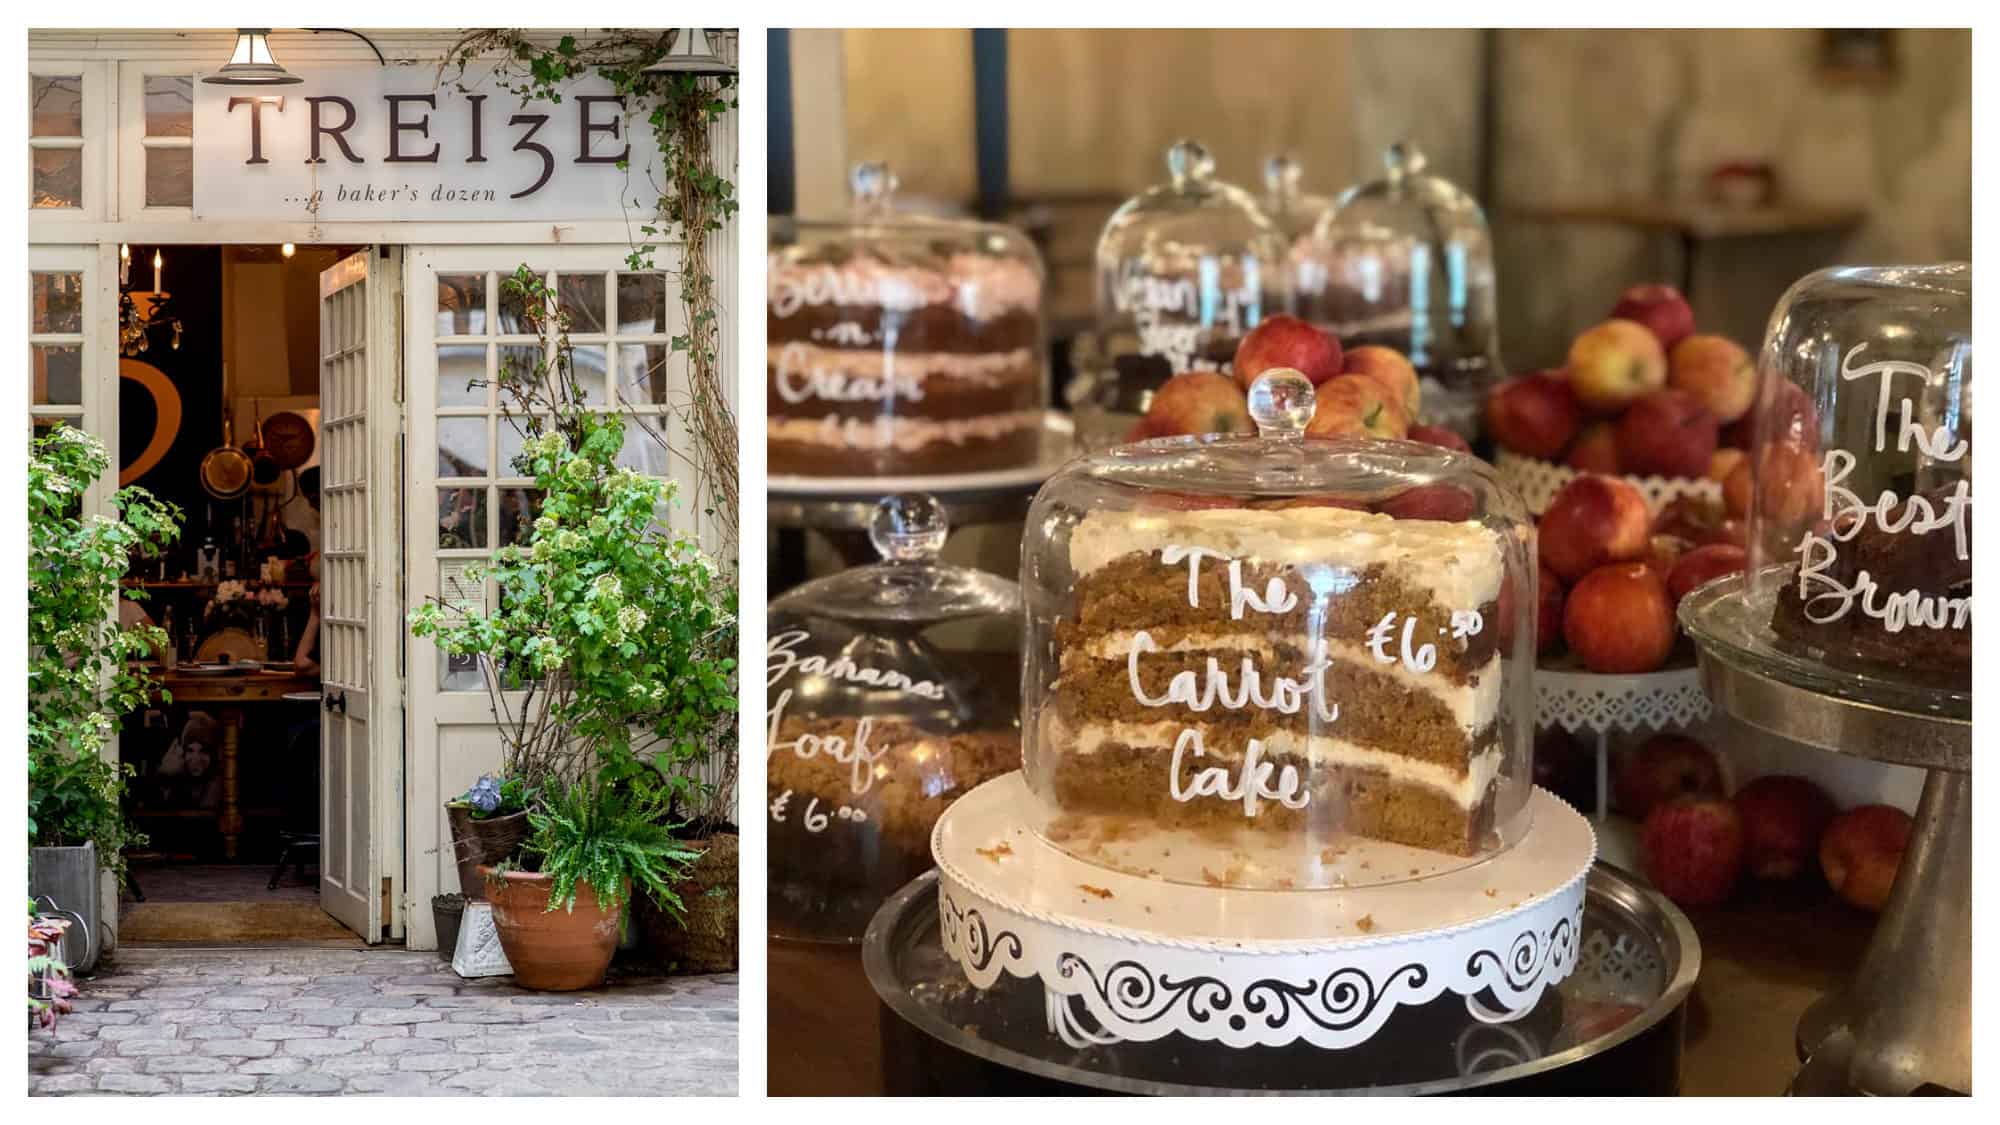 The doorway to the old location of Treize bakery (left) and its delicious cakes like carrot cake under glass bells (right).